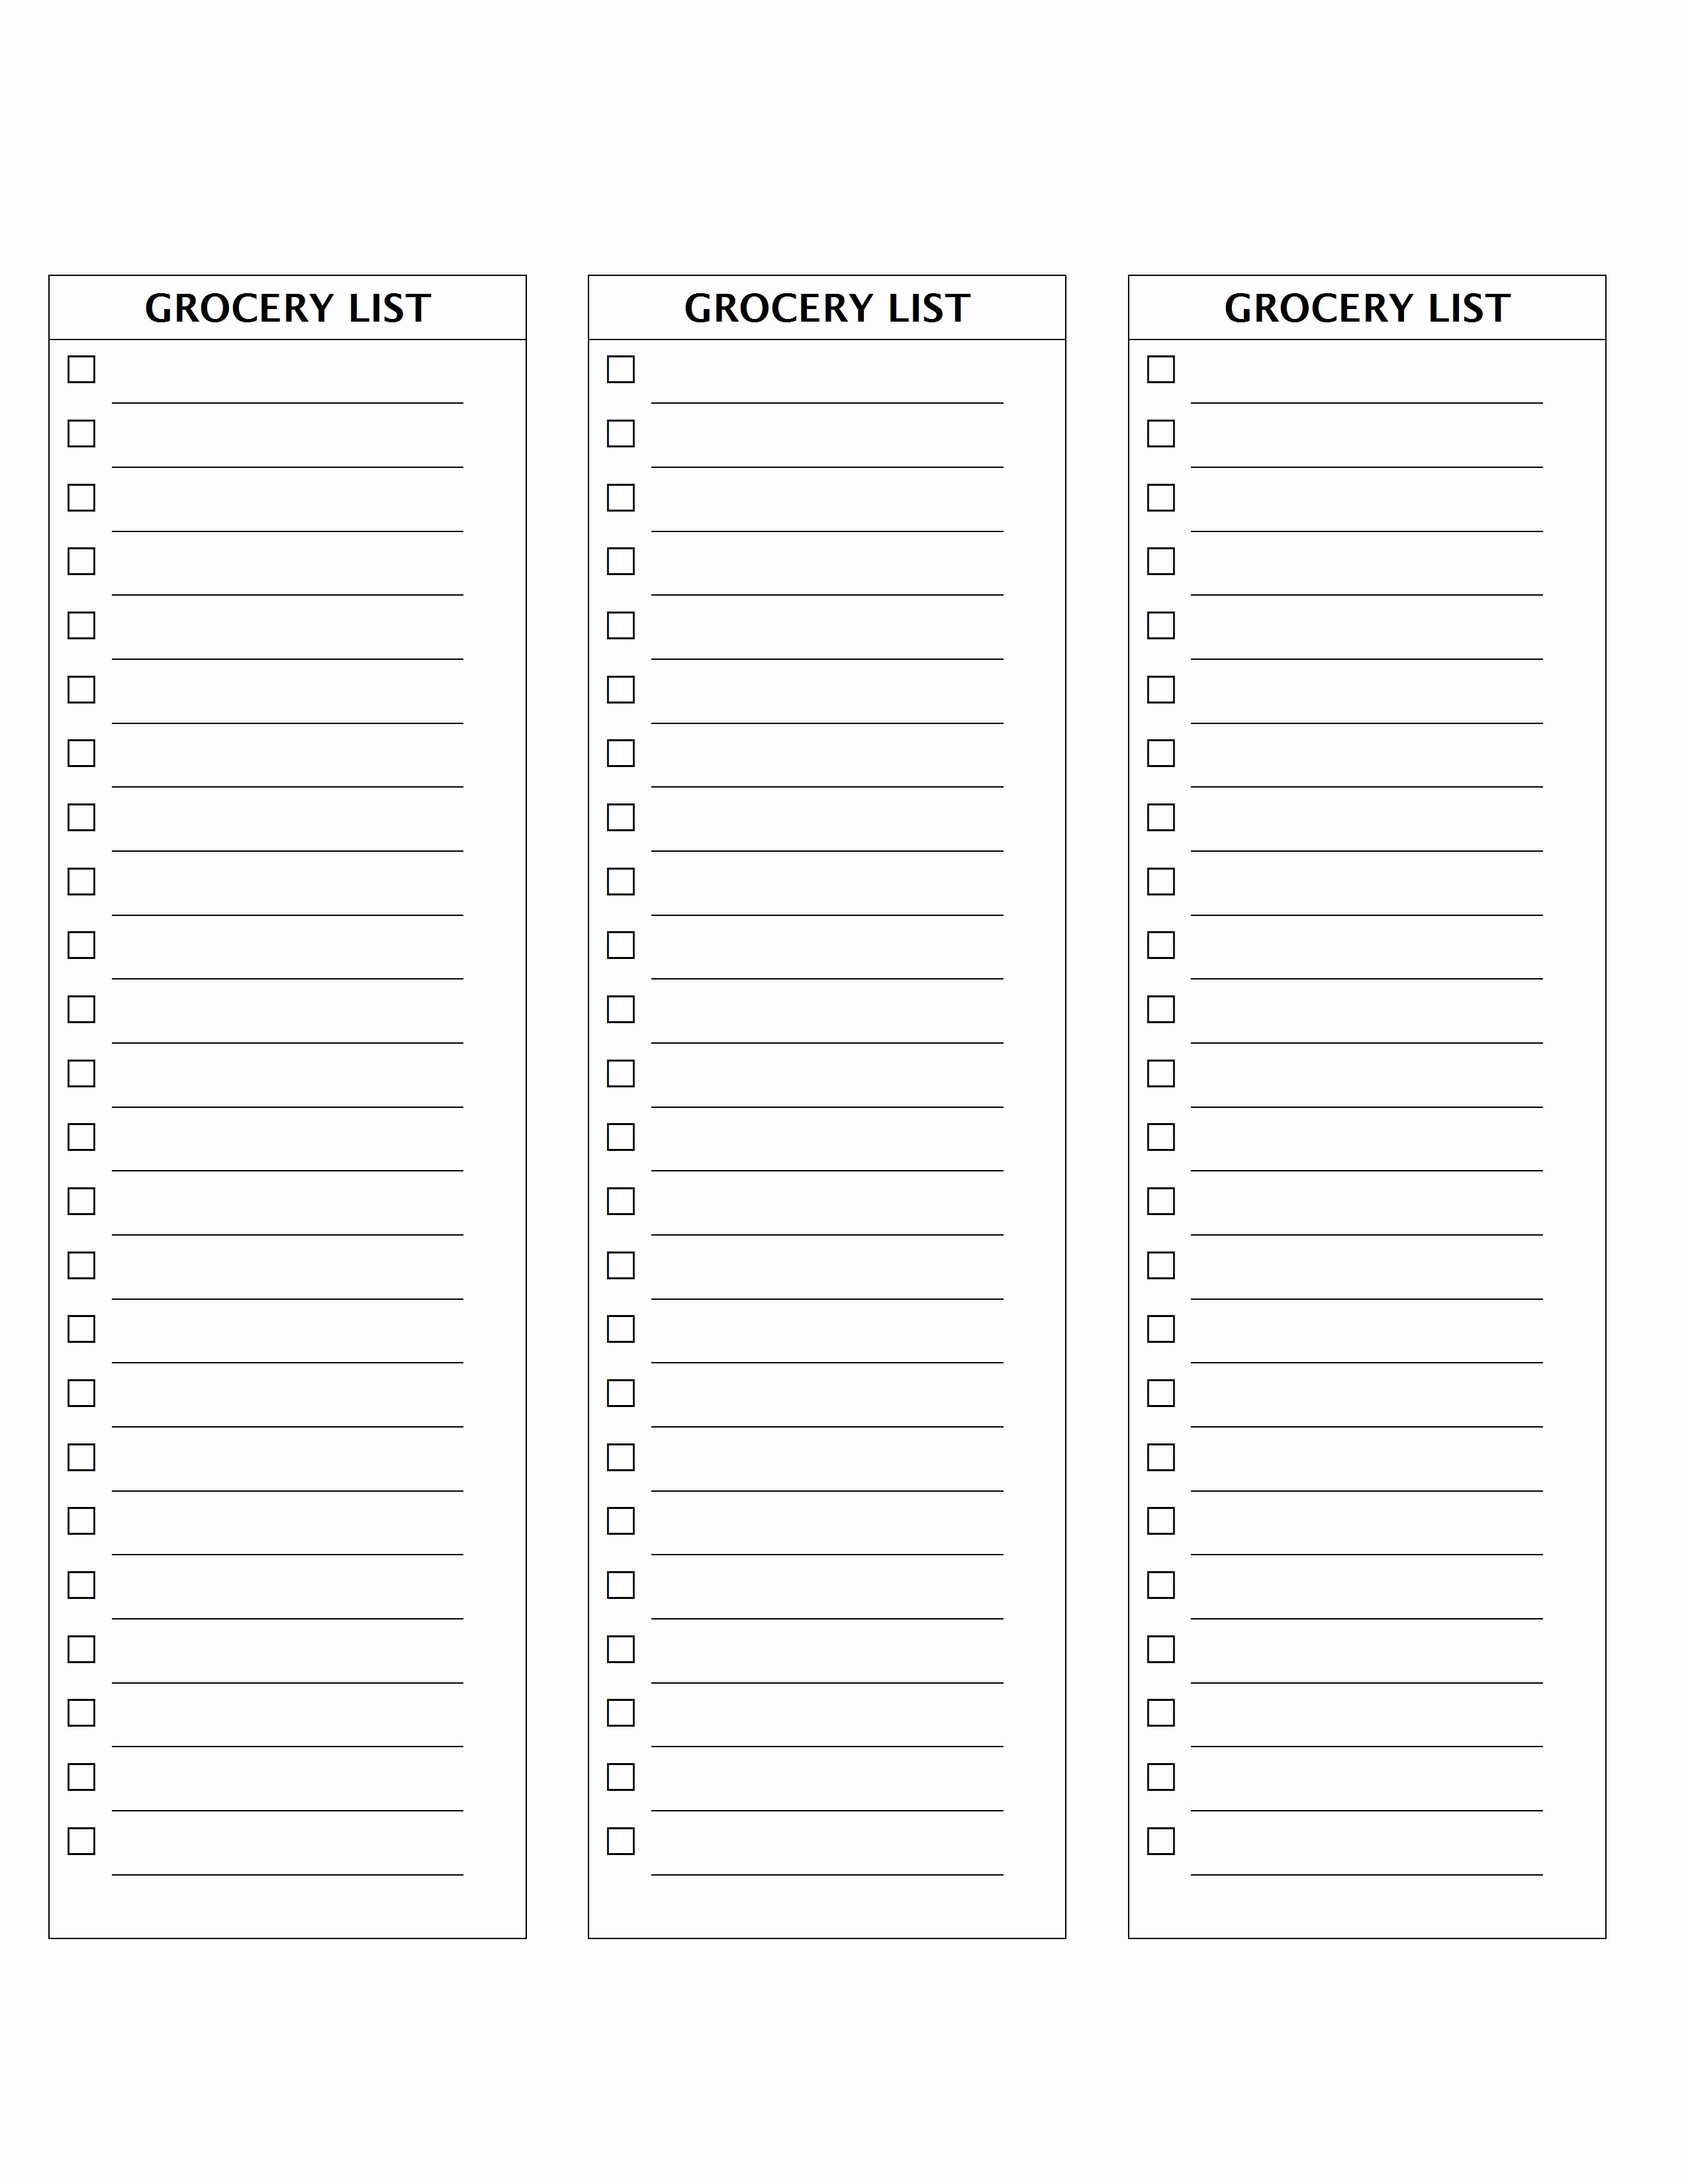 Grocery List Template Word Best Of Grocery List Template